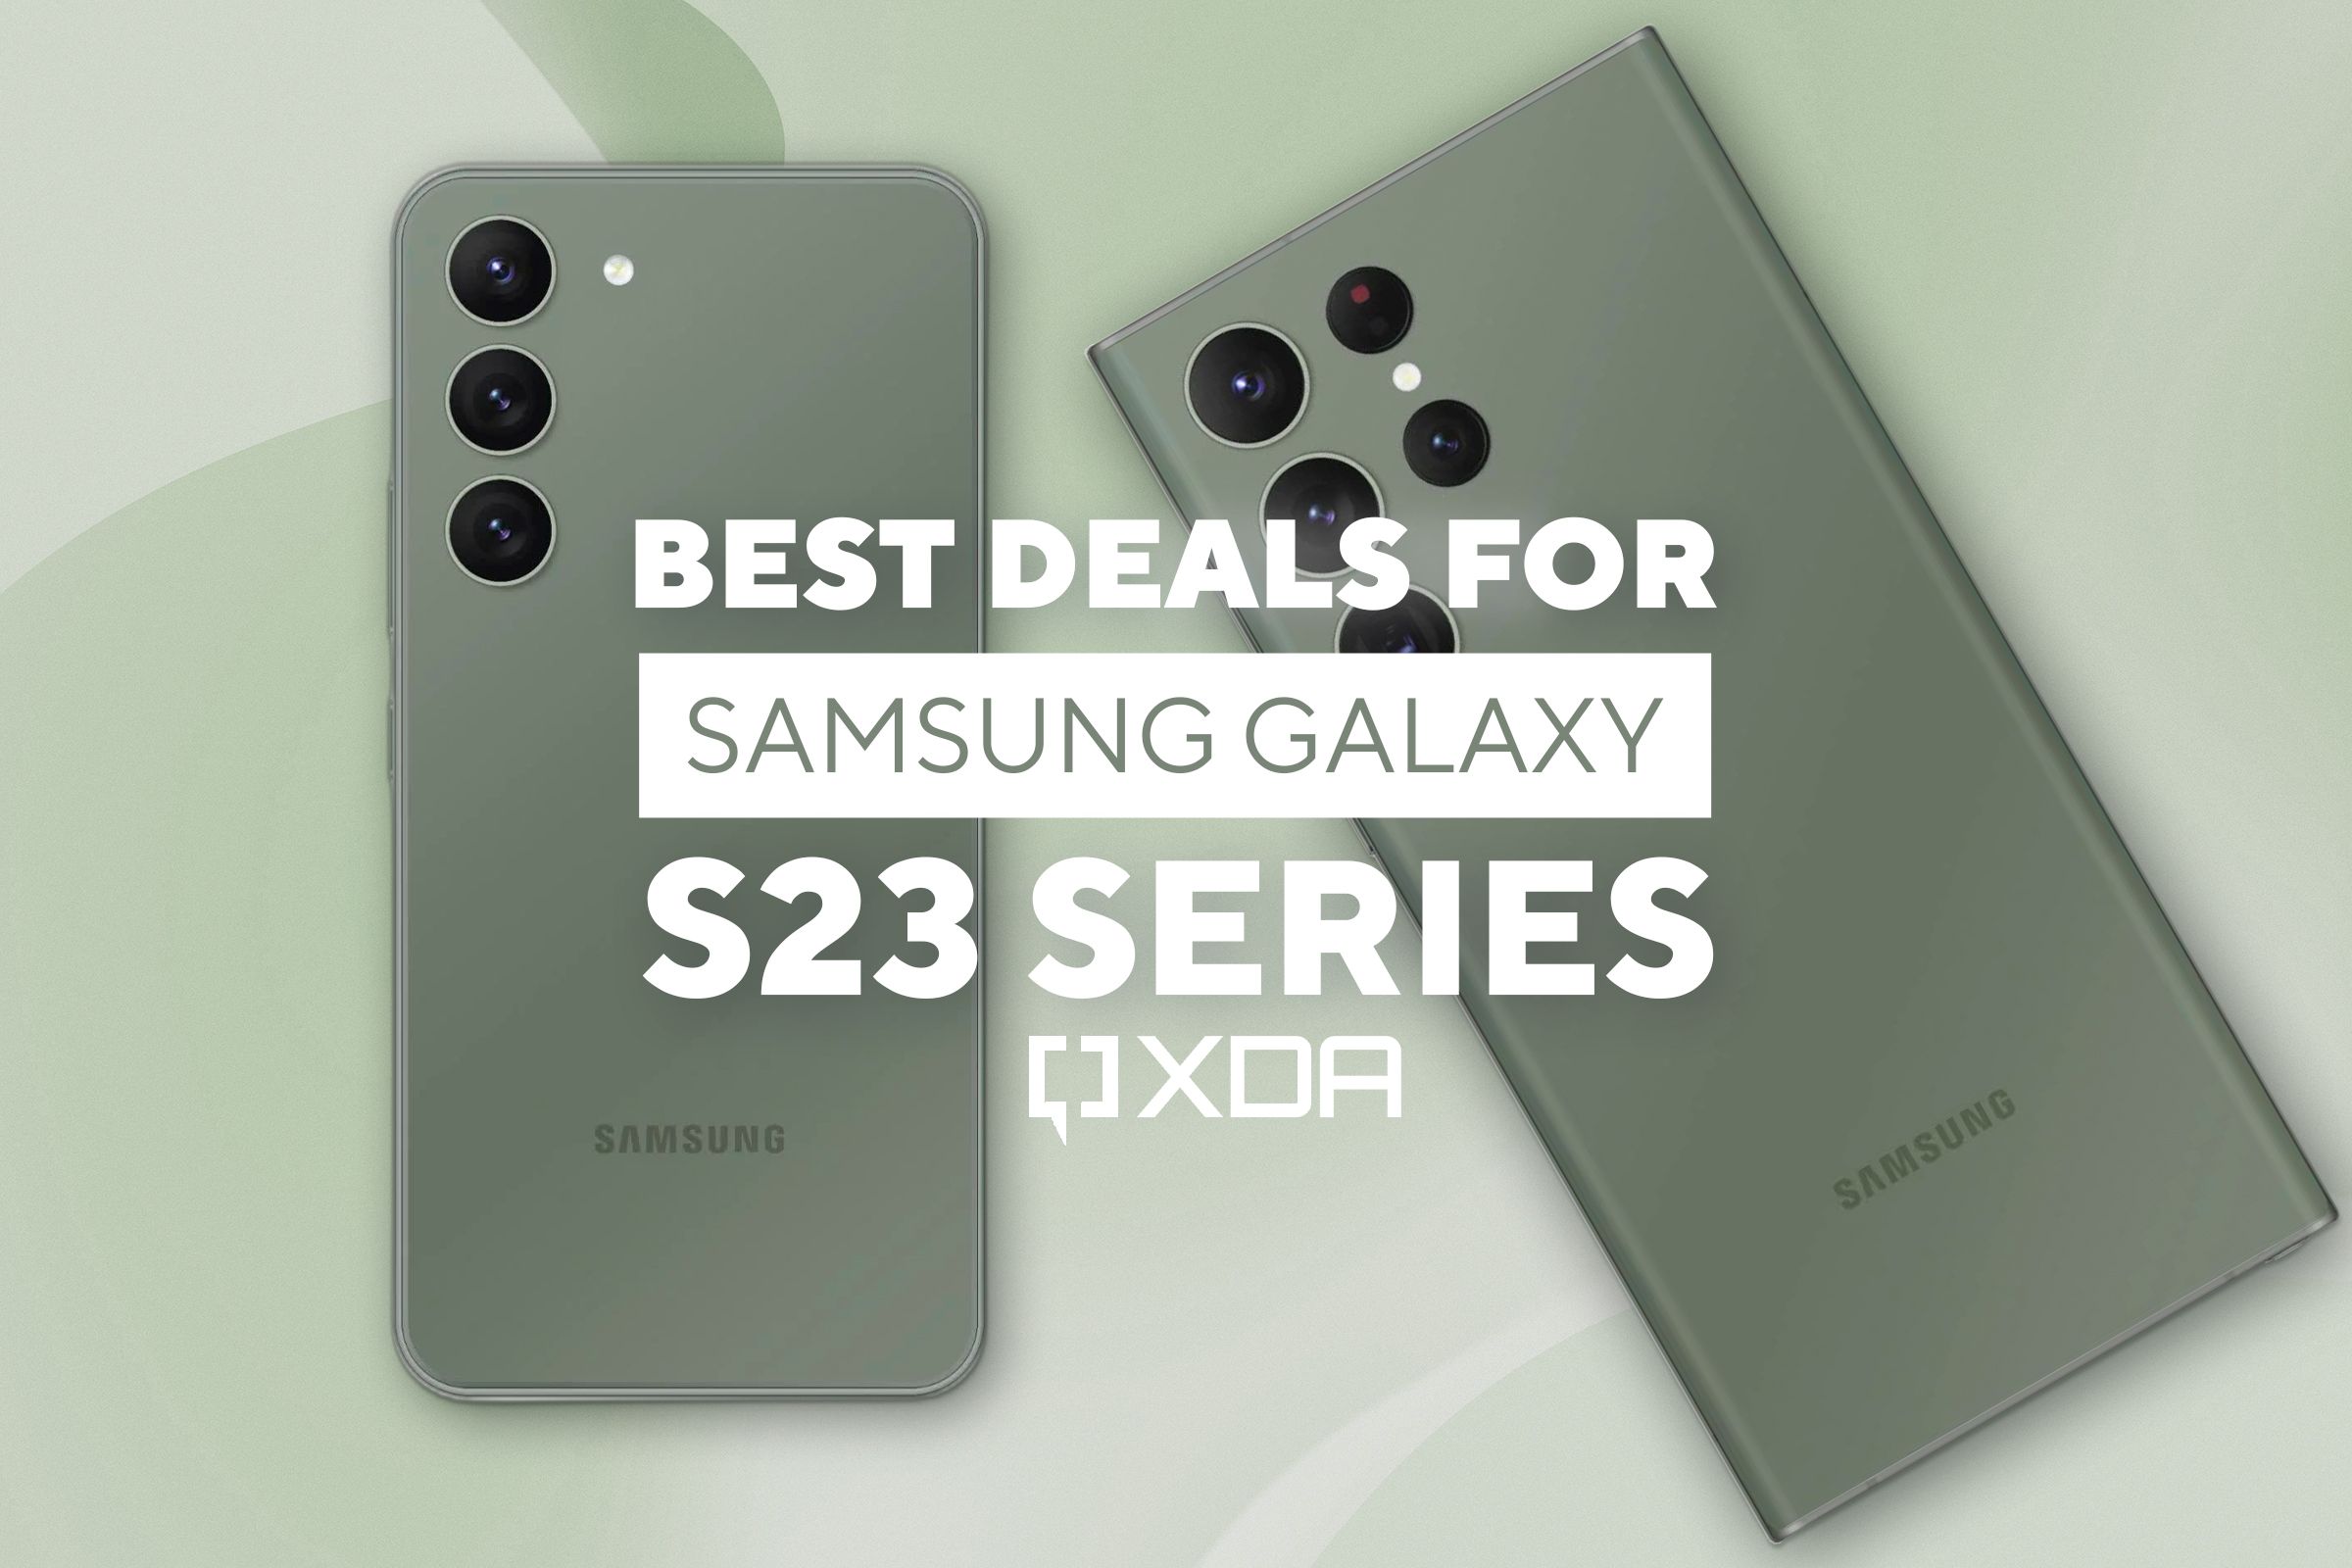 The 512GB Galaxy S23 Ultra is cheaper than on Prime Day at $400 off